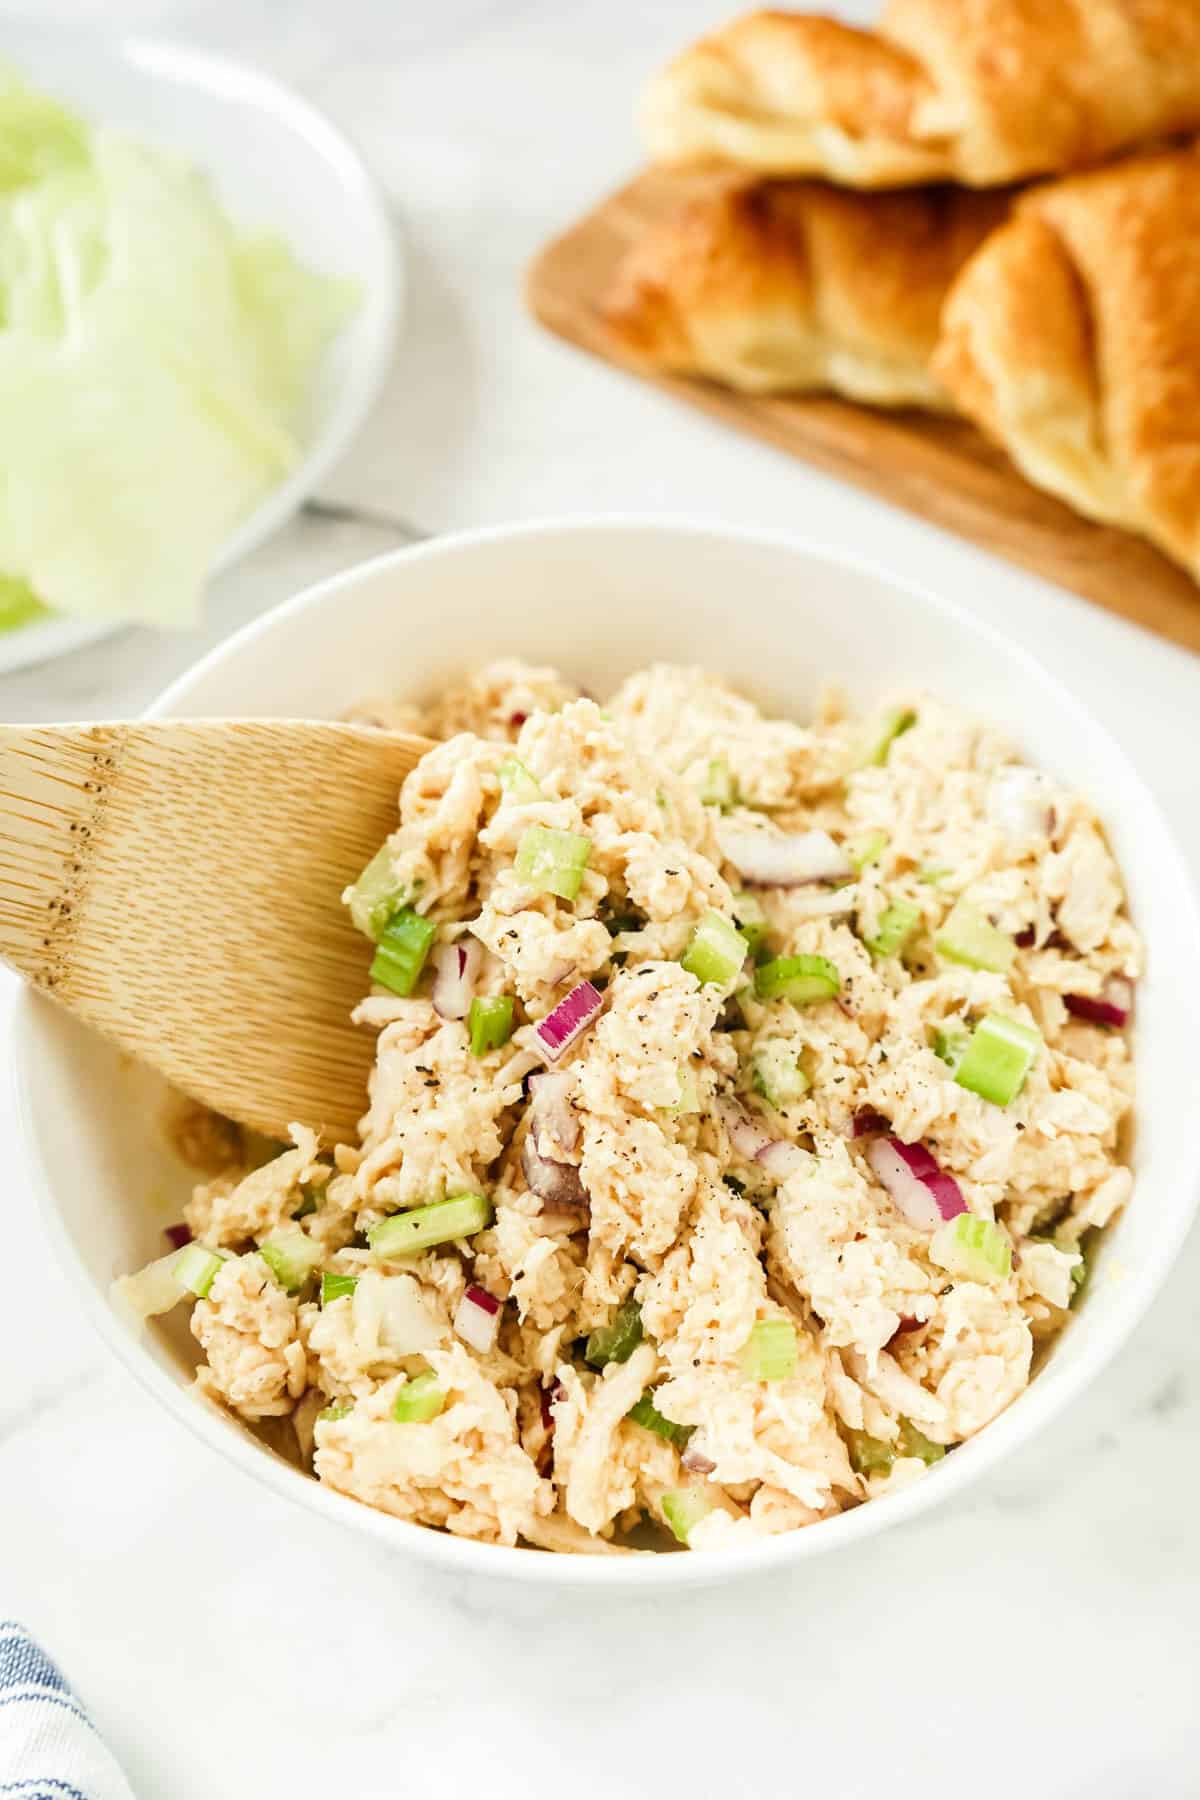 Chicken salad made without mayo in a white bowl with a wooden spoon.